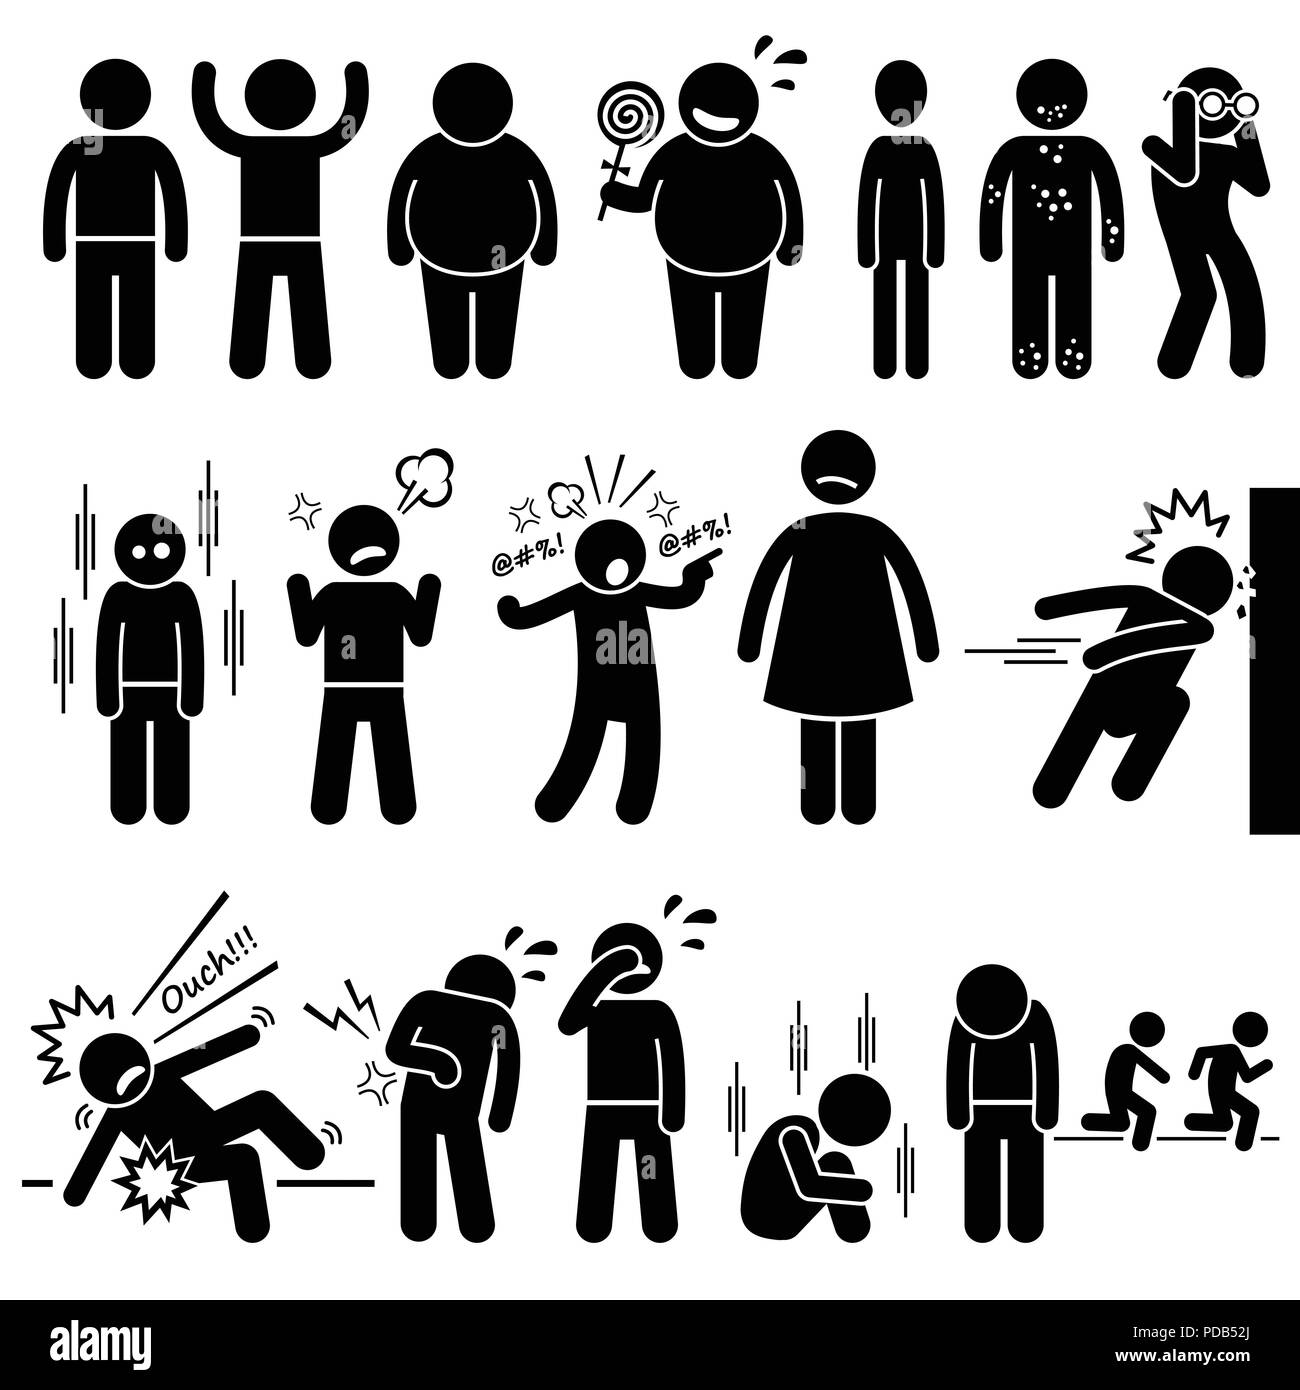 Children Health Physical and Mental Problem Syndrome Stick Figure Pictogram Icons Stock Vector